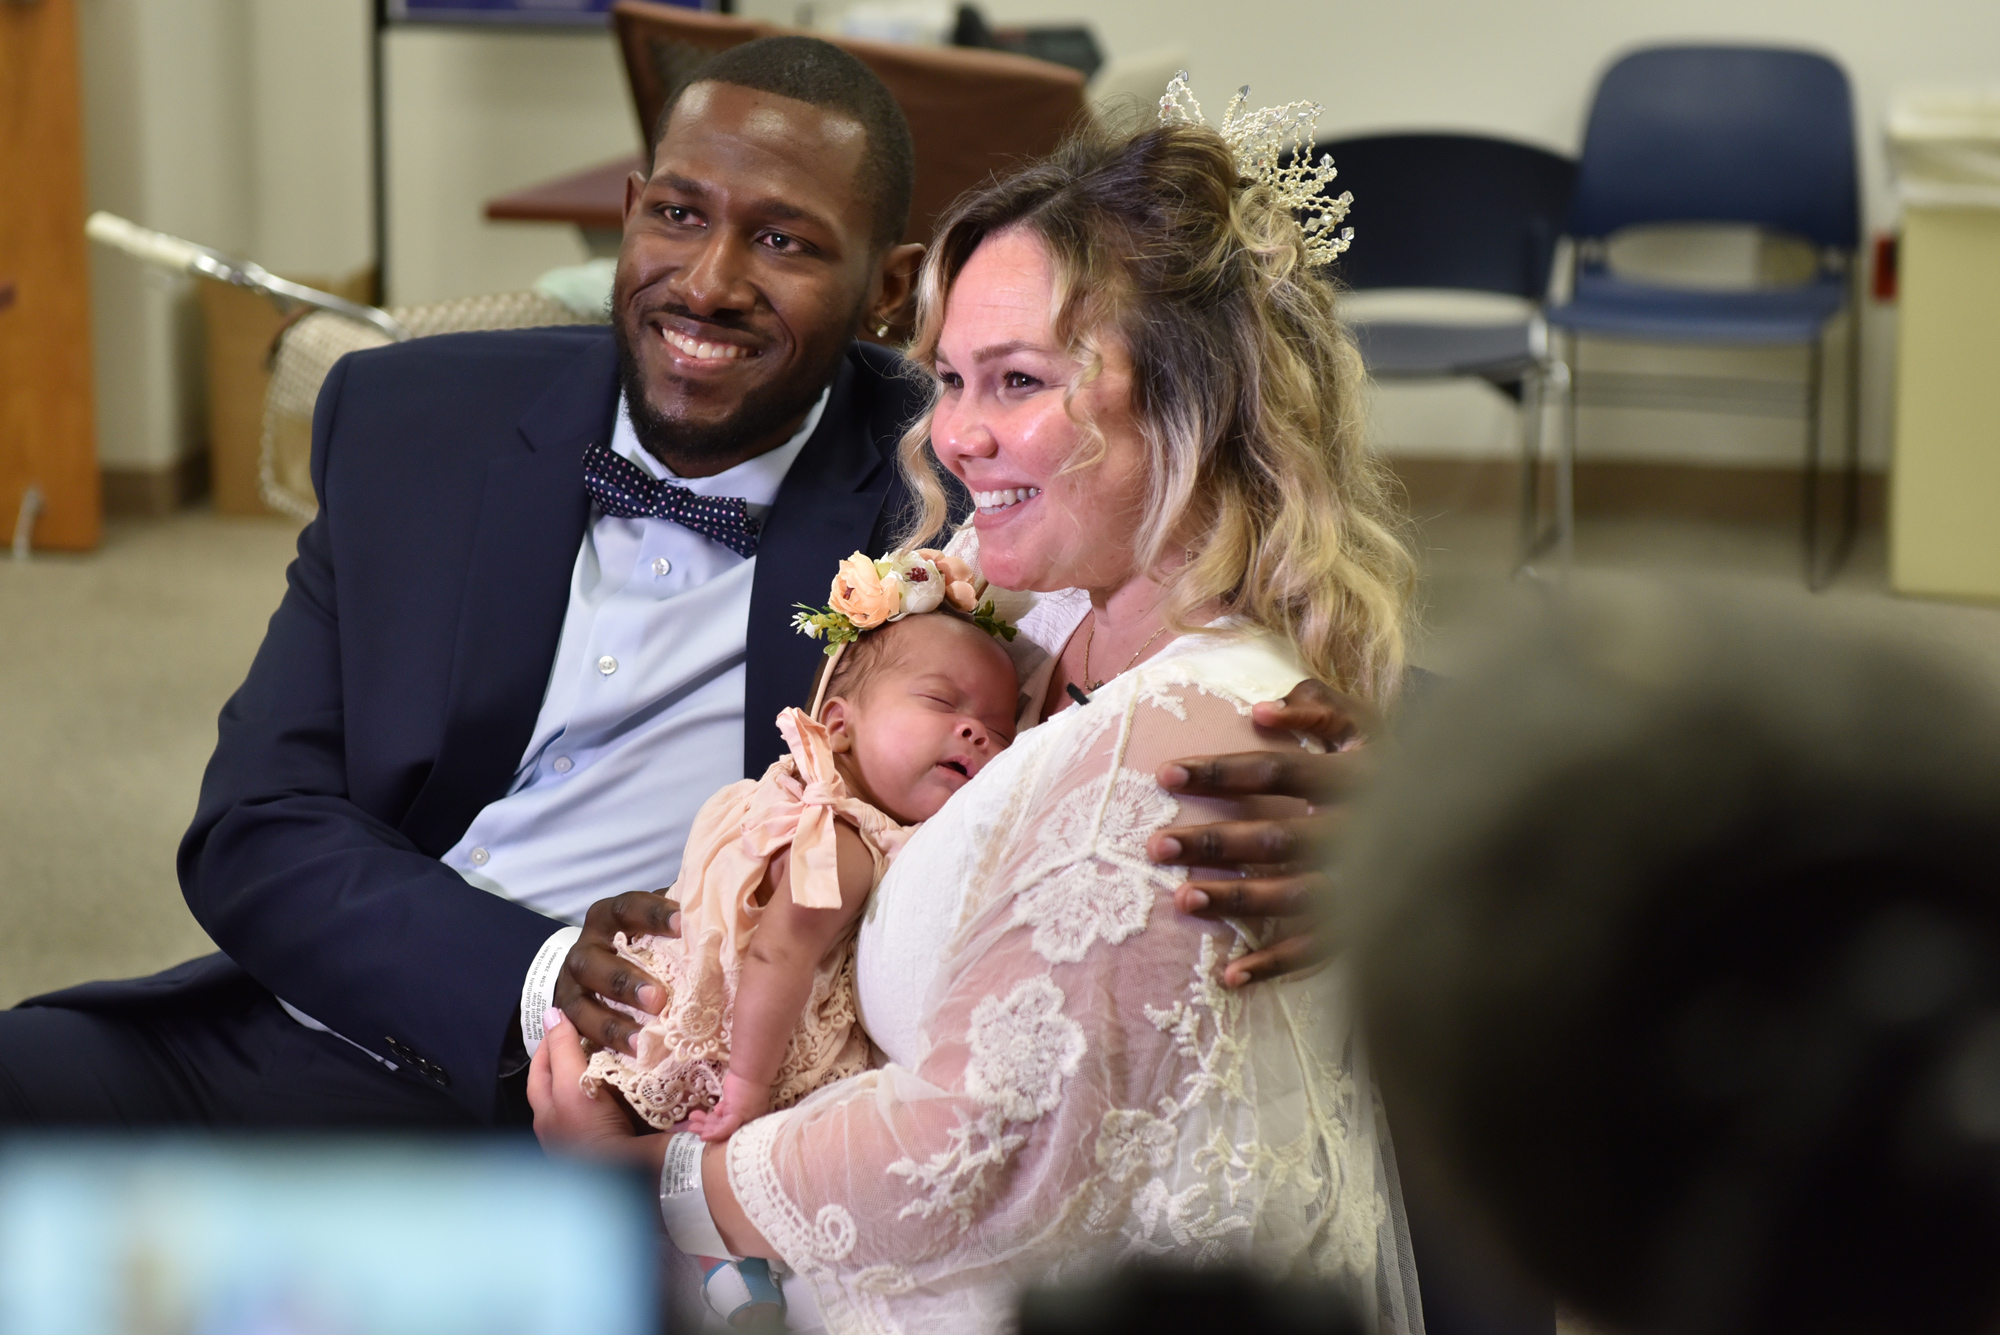 Grier Stanley Barnwell and Jason Barnwell - Premature birth leads to parents’ wedding in NICU